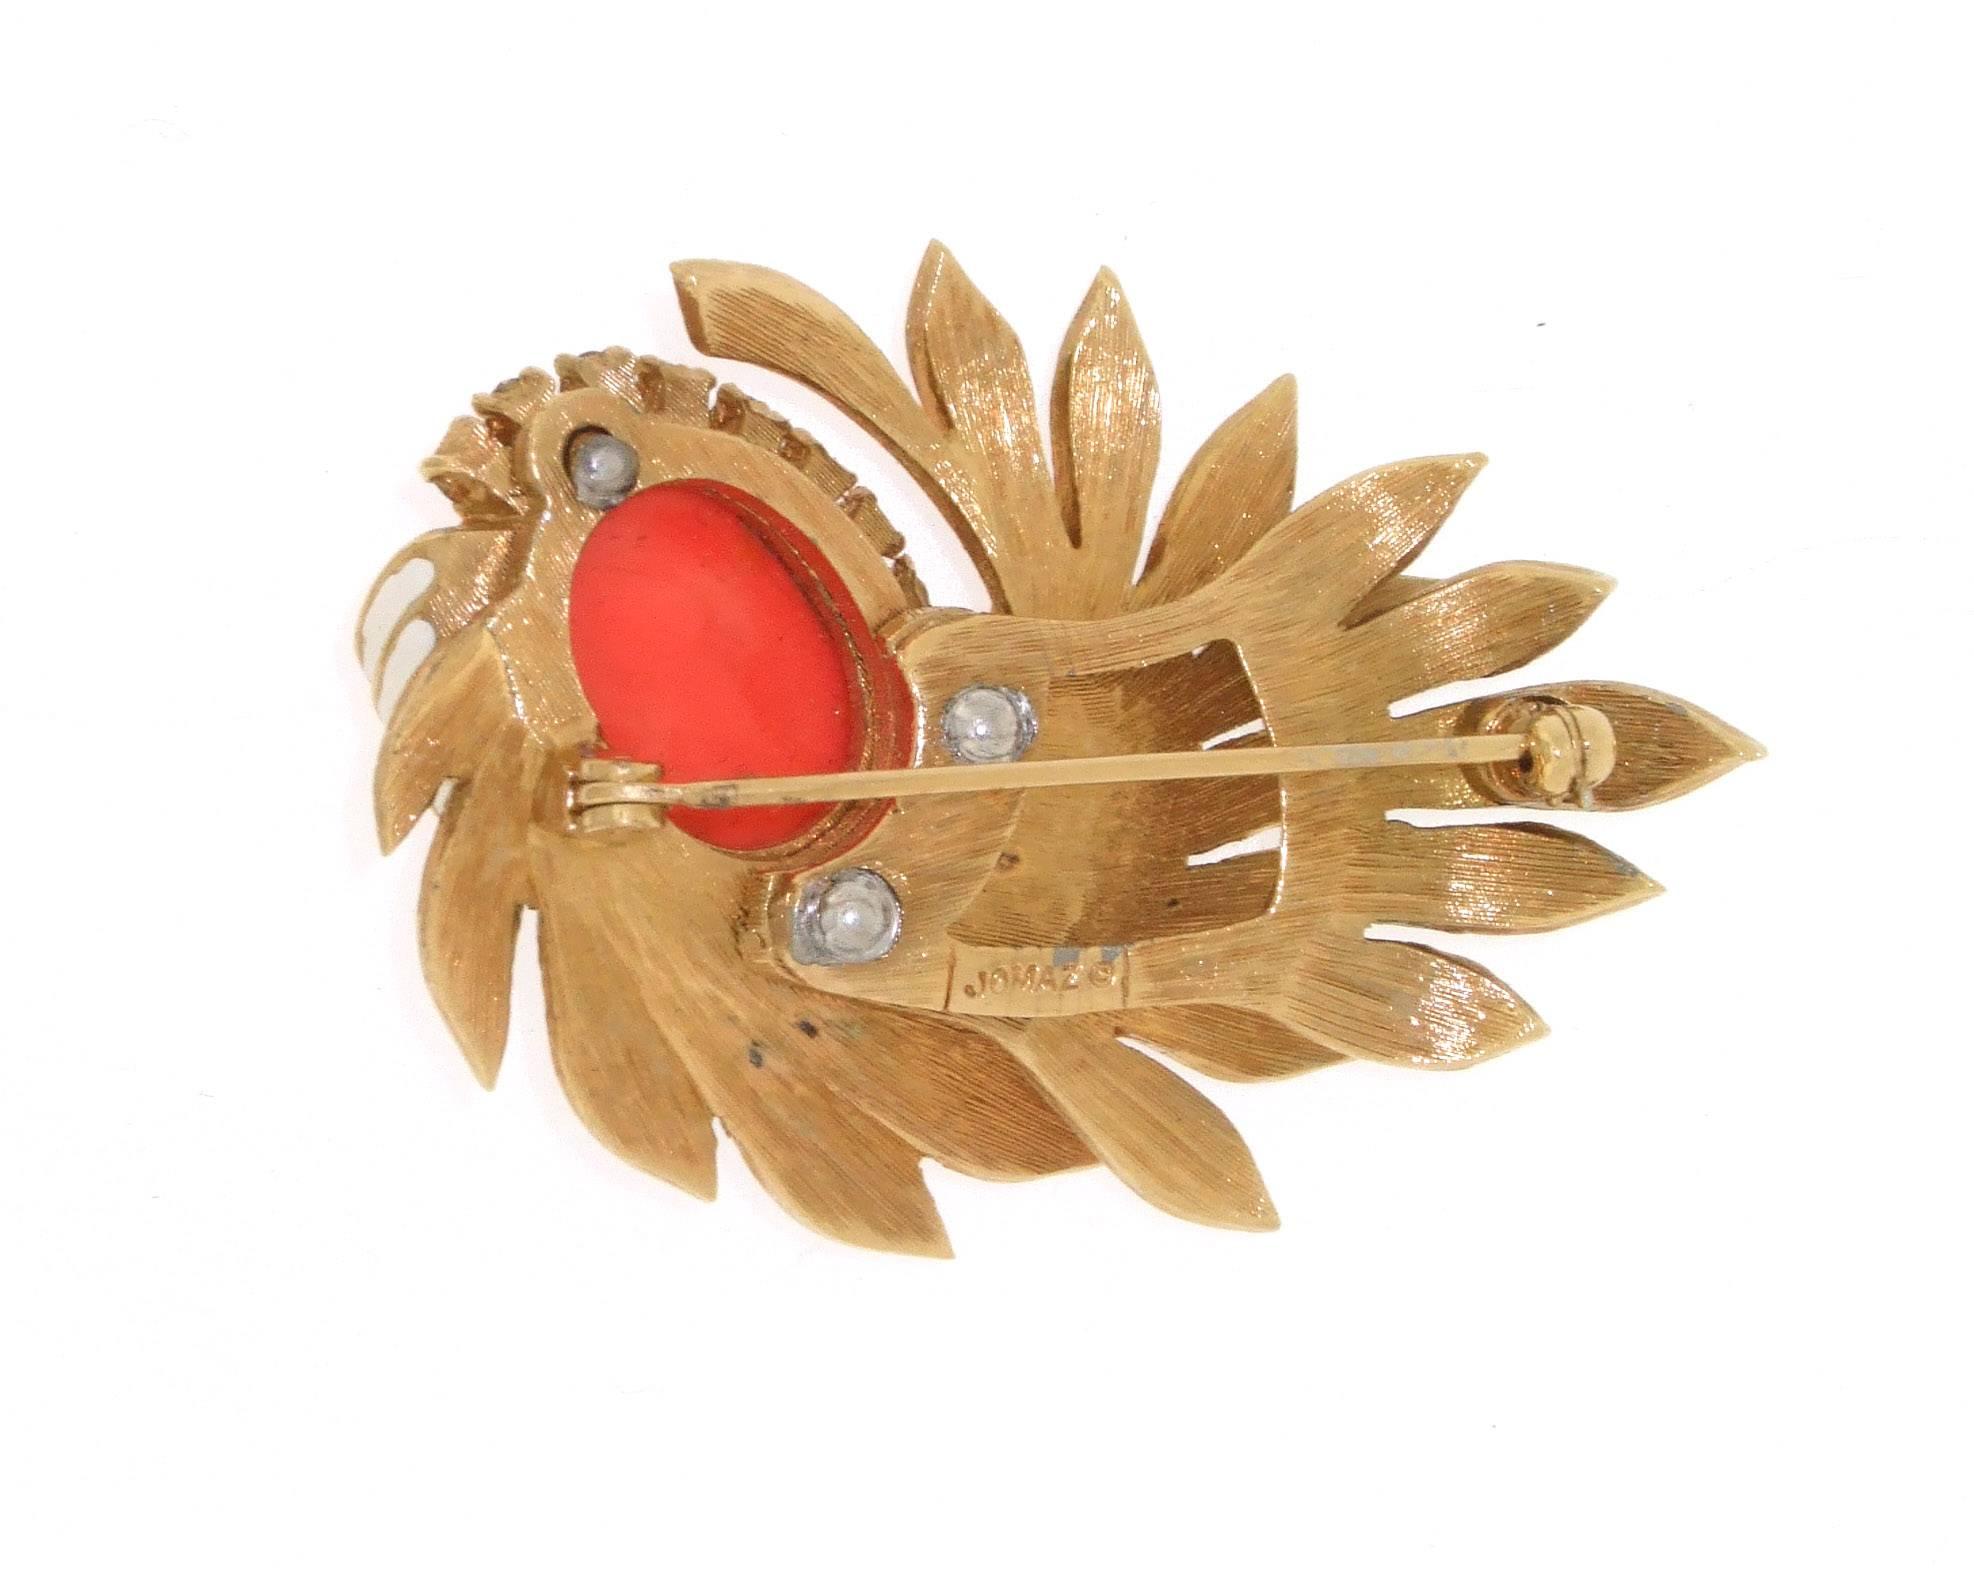 A vintage brooch by Jomaz, Joseph Mazer, with coral coloured glass set in a floral spray decorated with white enamel and clear crystals. In gold plated costume metal. The matching earrings are available in a separate listing.

It measures 5.2cm